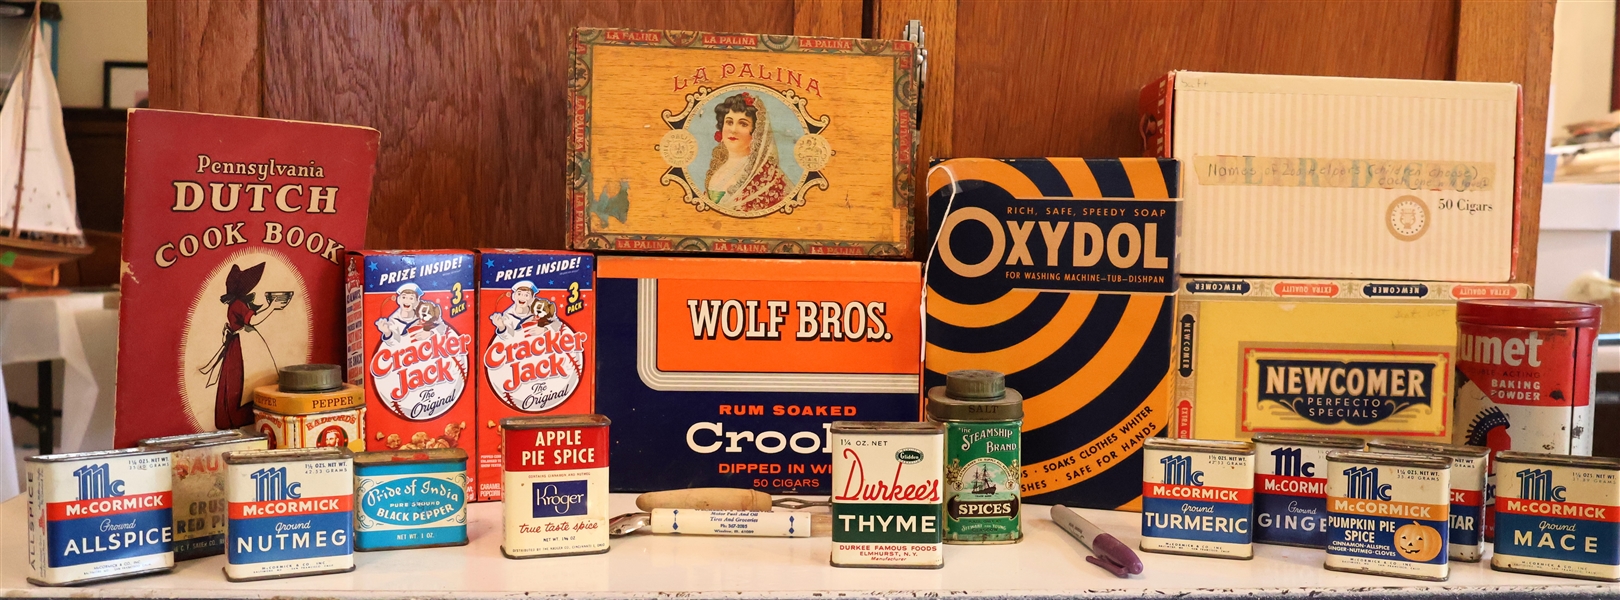 Collection of Vintage Kitchen Items and Tins - Spice Tins, Cook Book, Oxydol Soap Box, Cigar Boxes, Wolf Bros. Rum Soaked Crooks, Opener, Etc. 